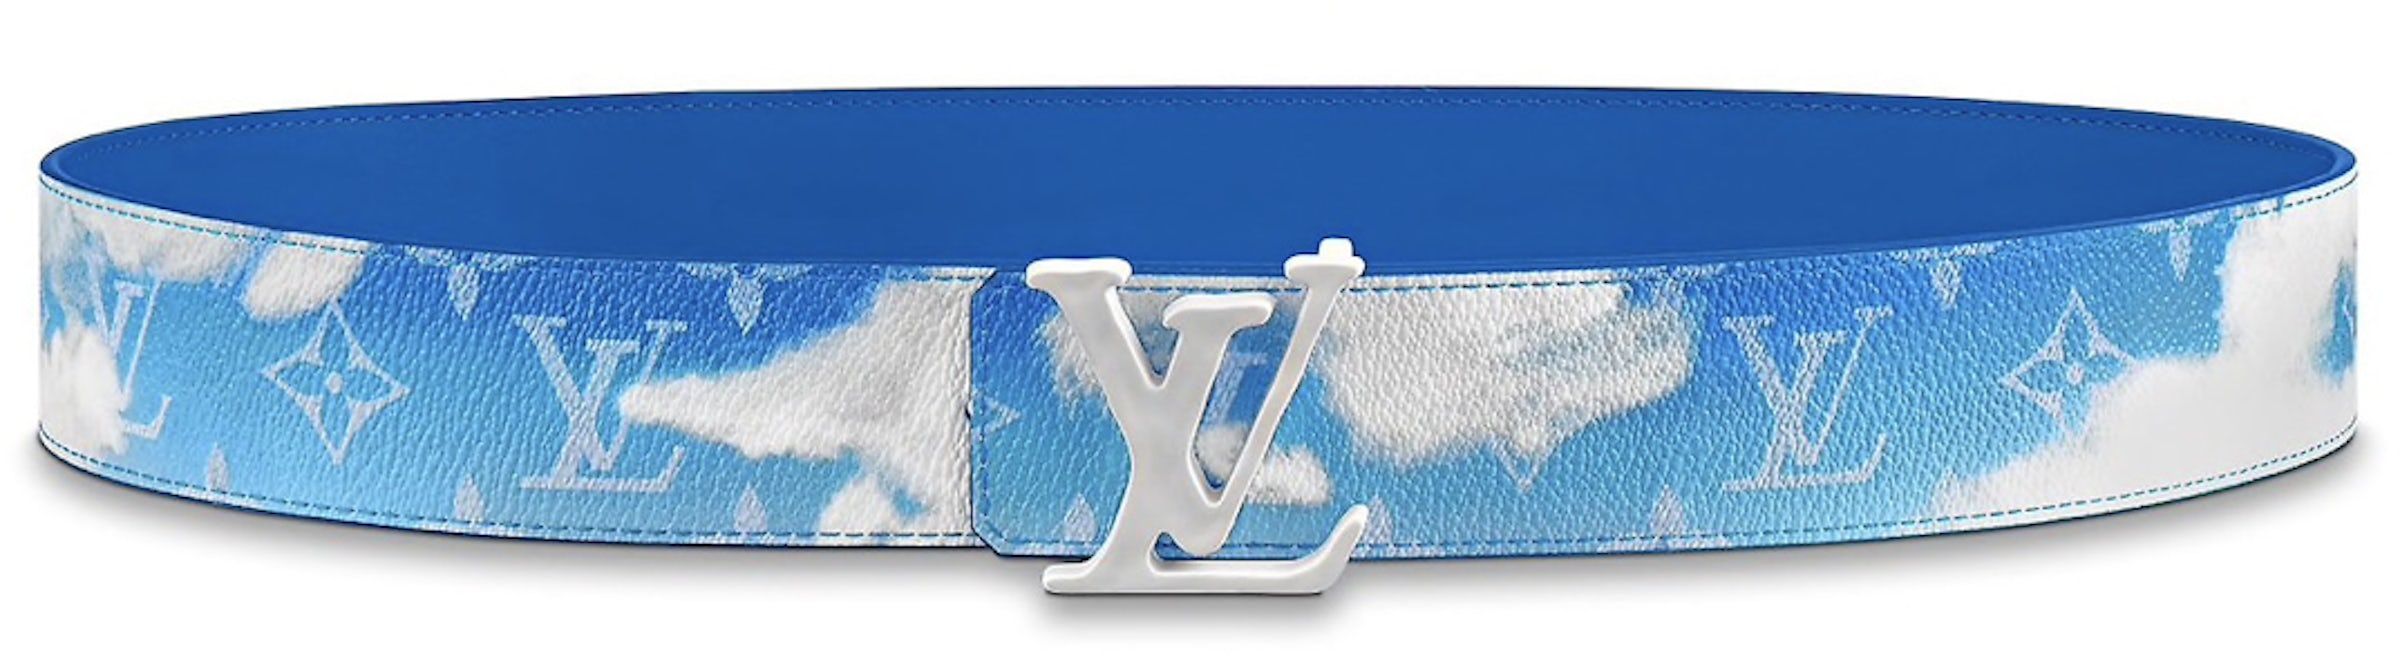 Limited Edition LV Initials Reversible 40mm Belt in Damier Graphite Gi